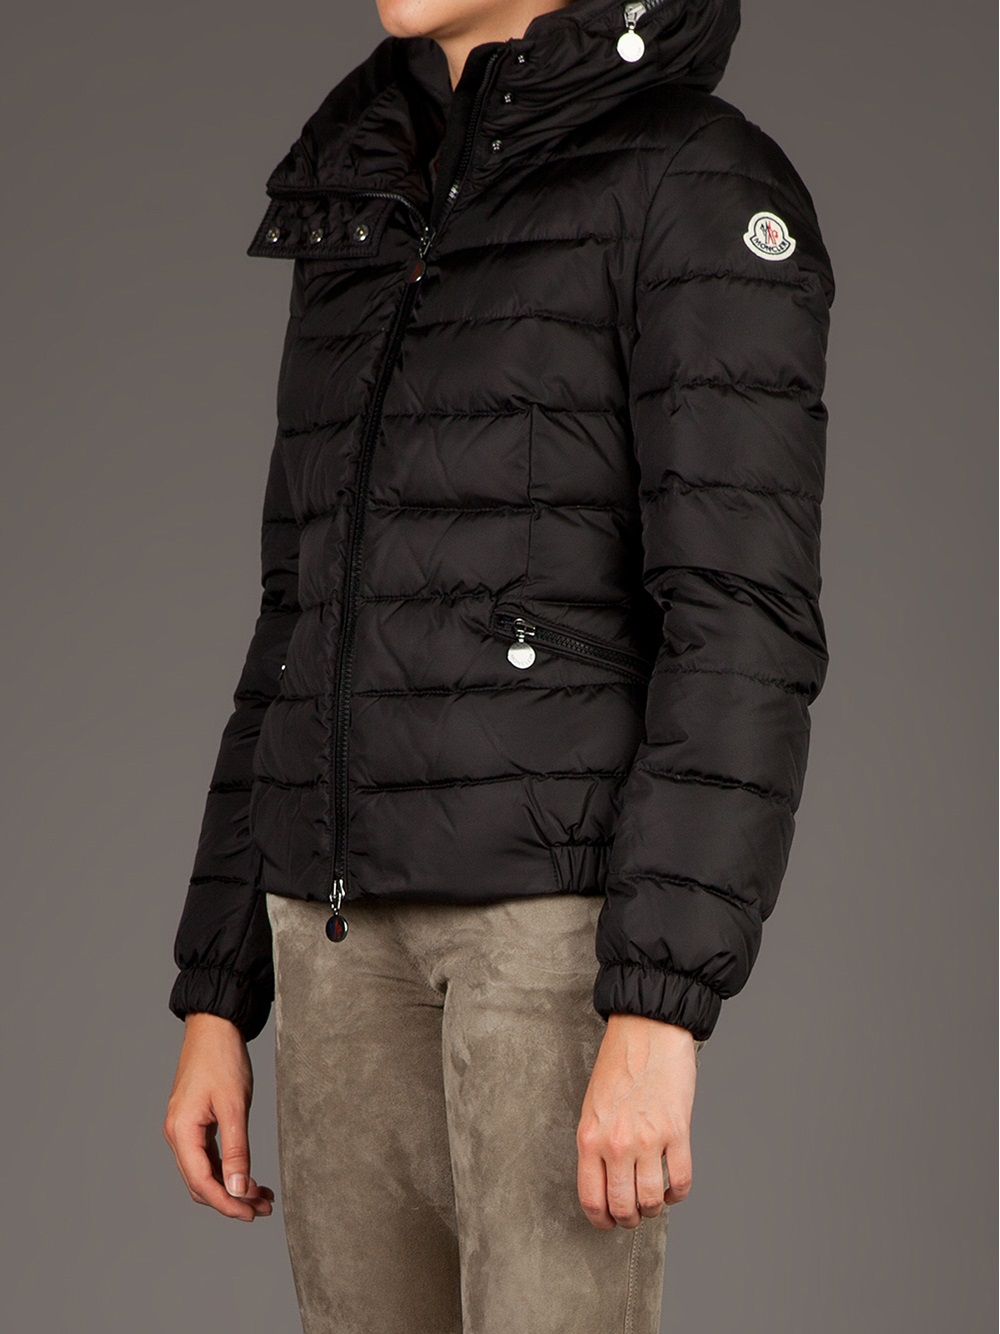 Moncler Sanglier Padded Jacket in Black | Lyst